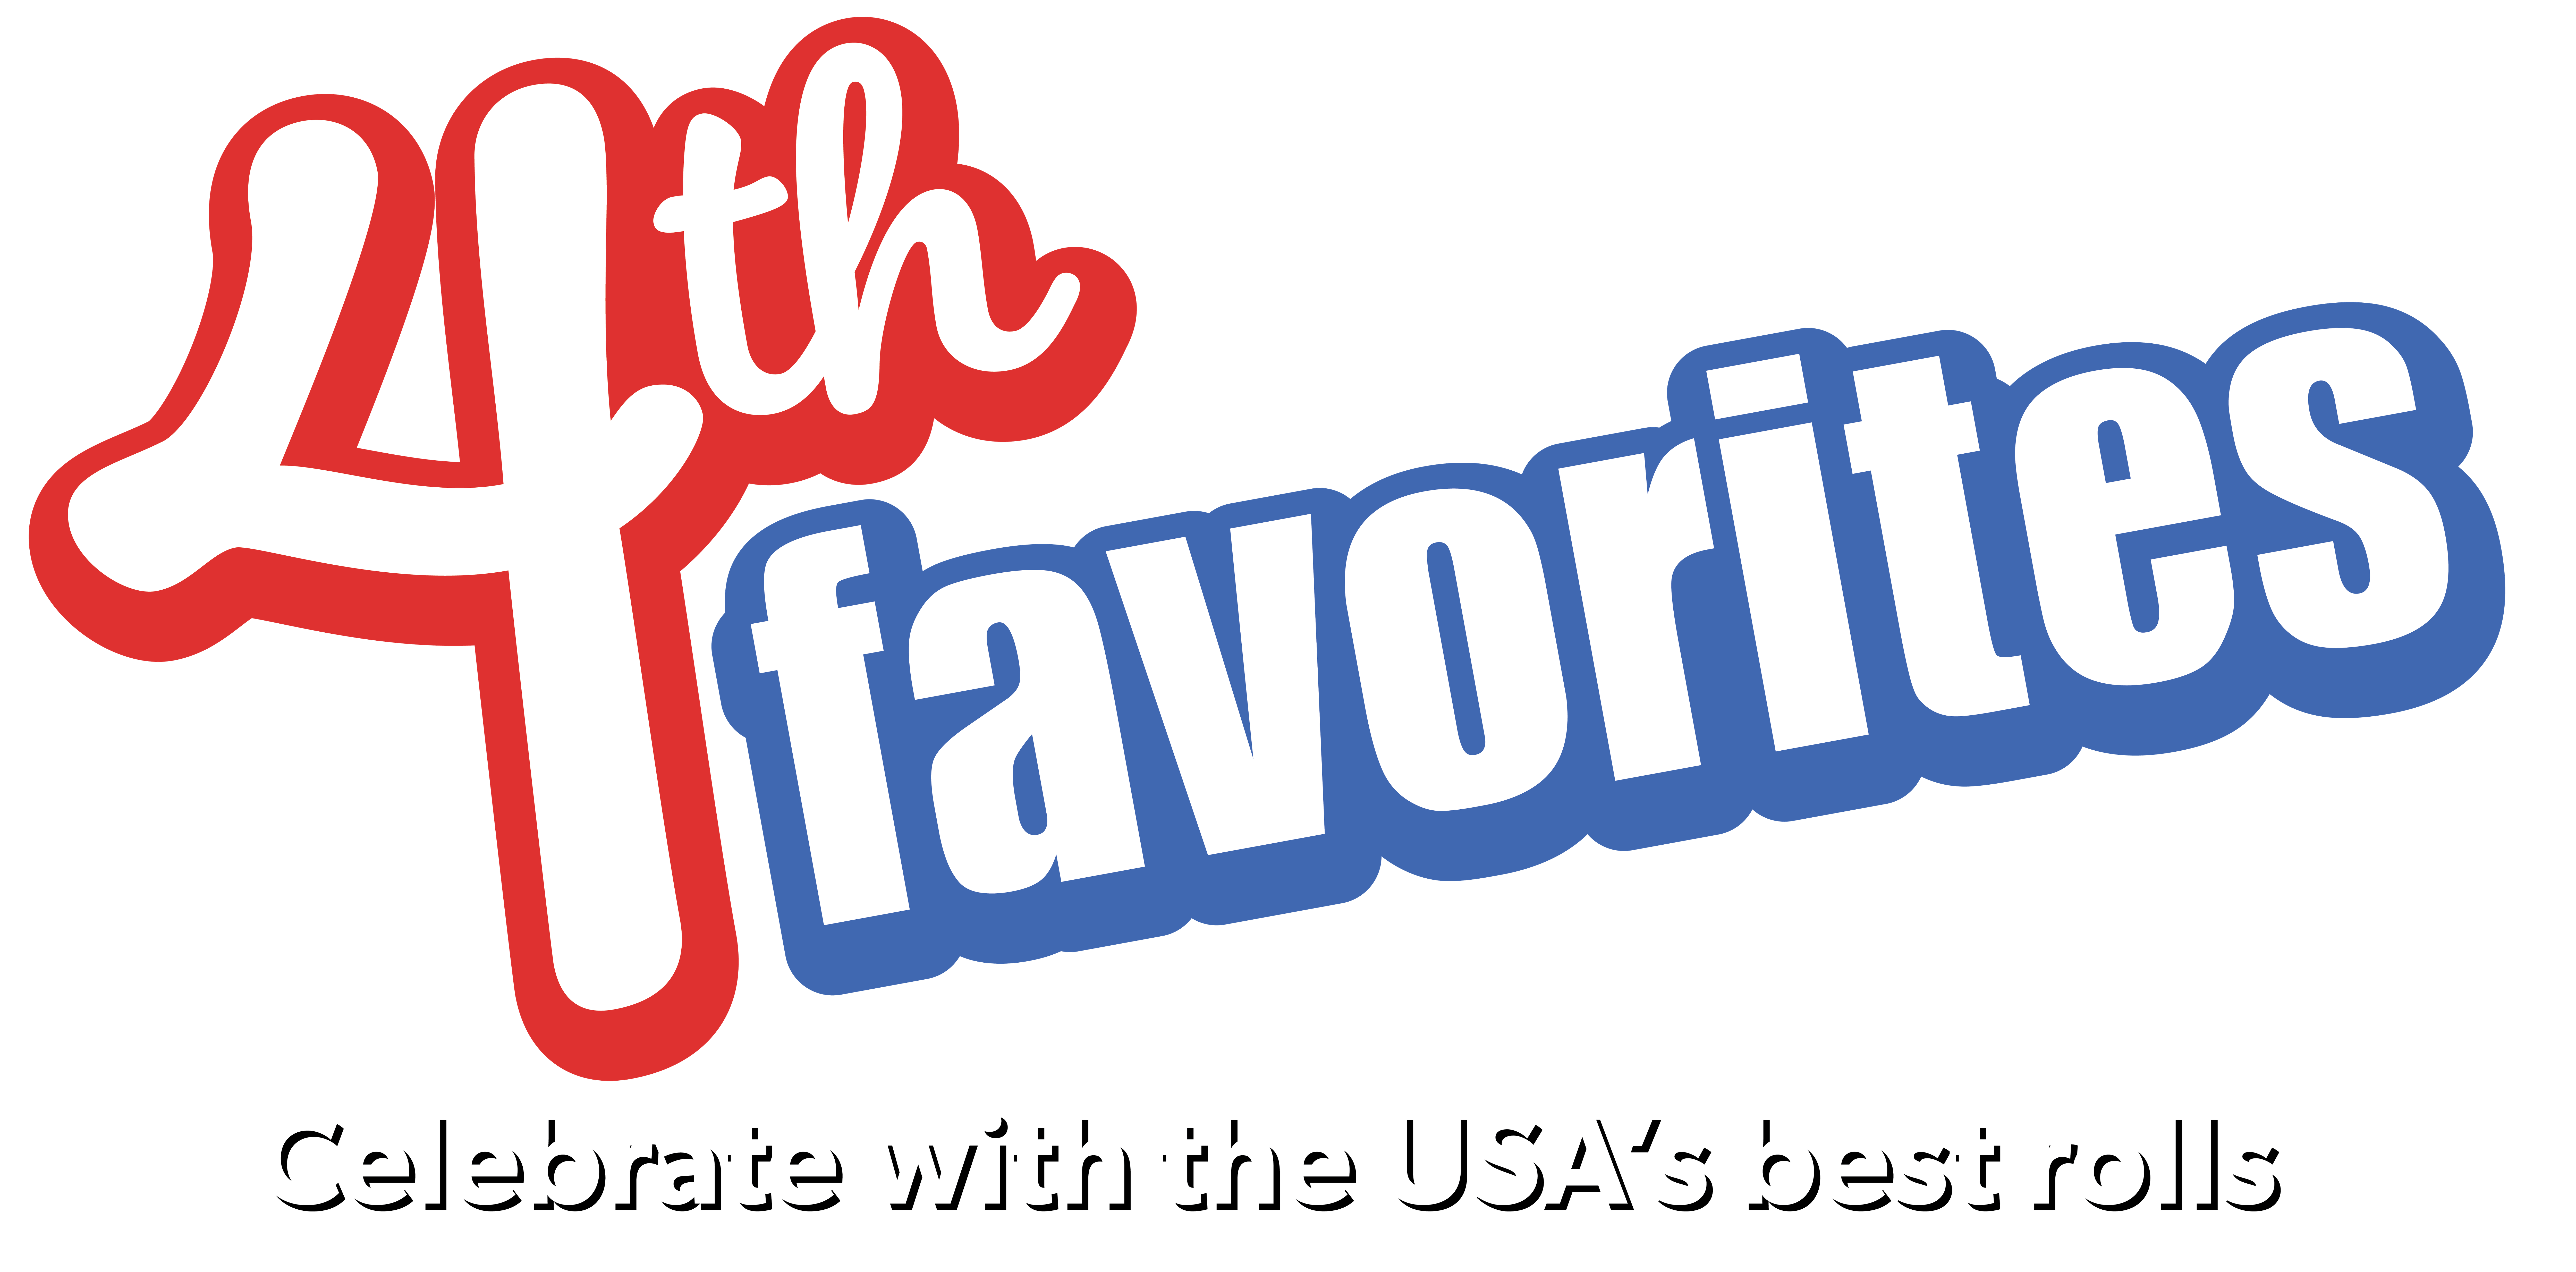 4th favorites, celebrate with the USA's best rolls